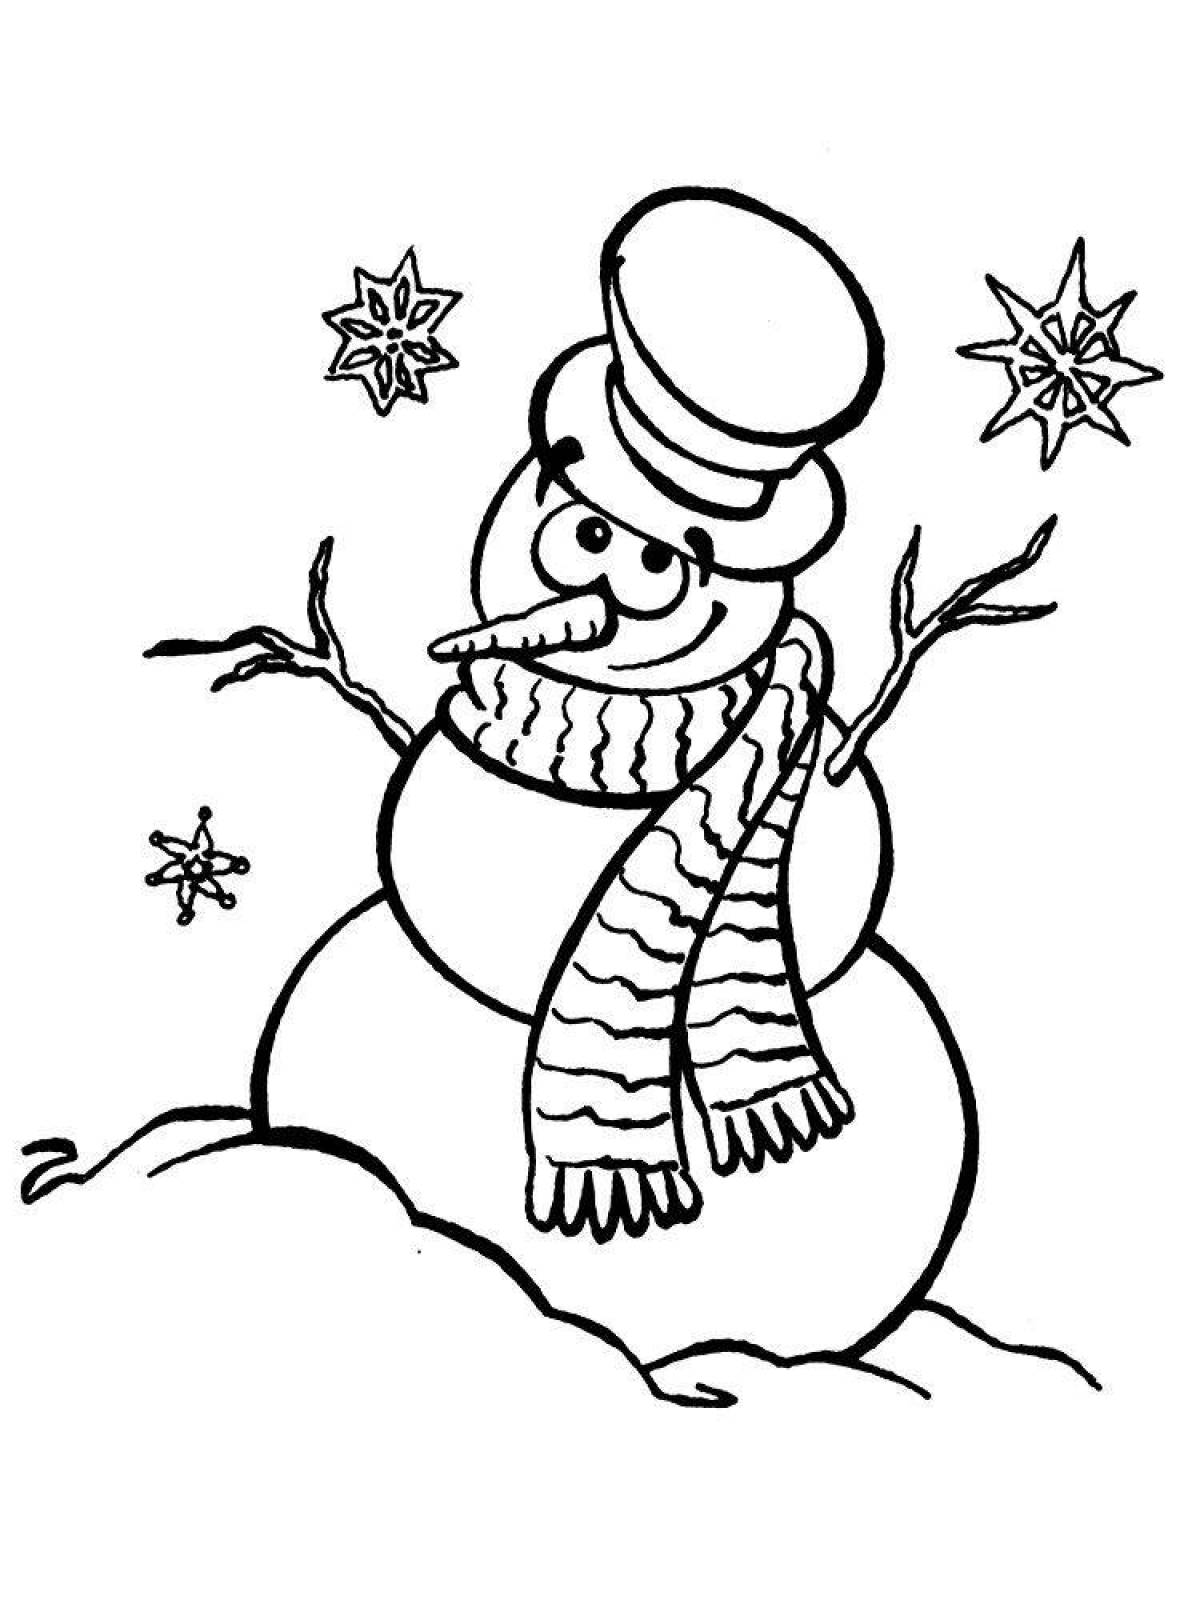 Radiant children's Christmas coloring book